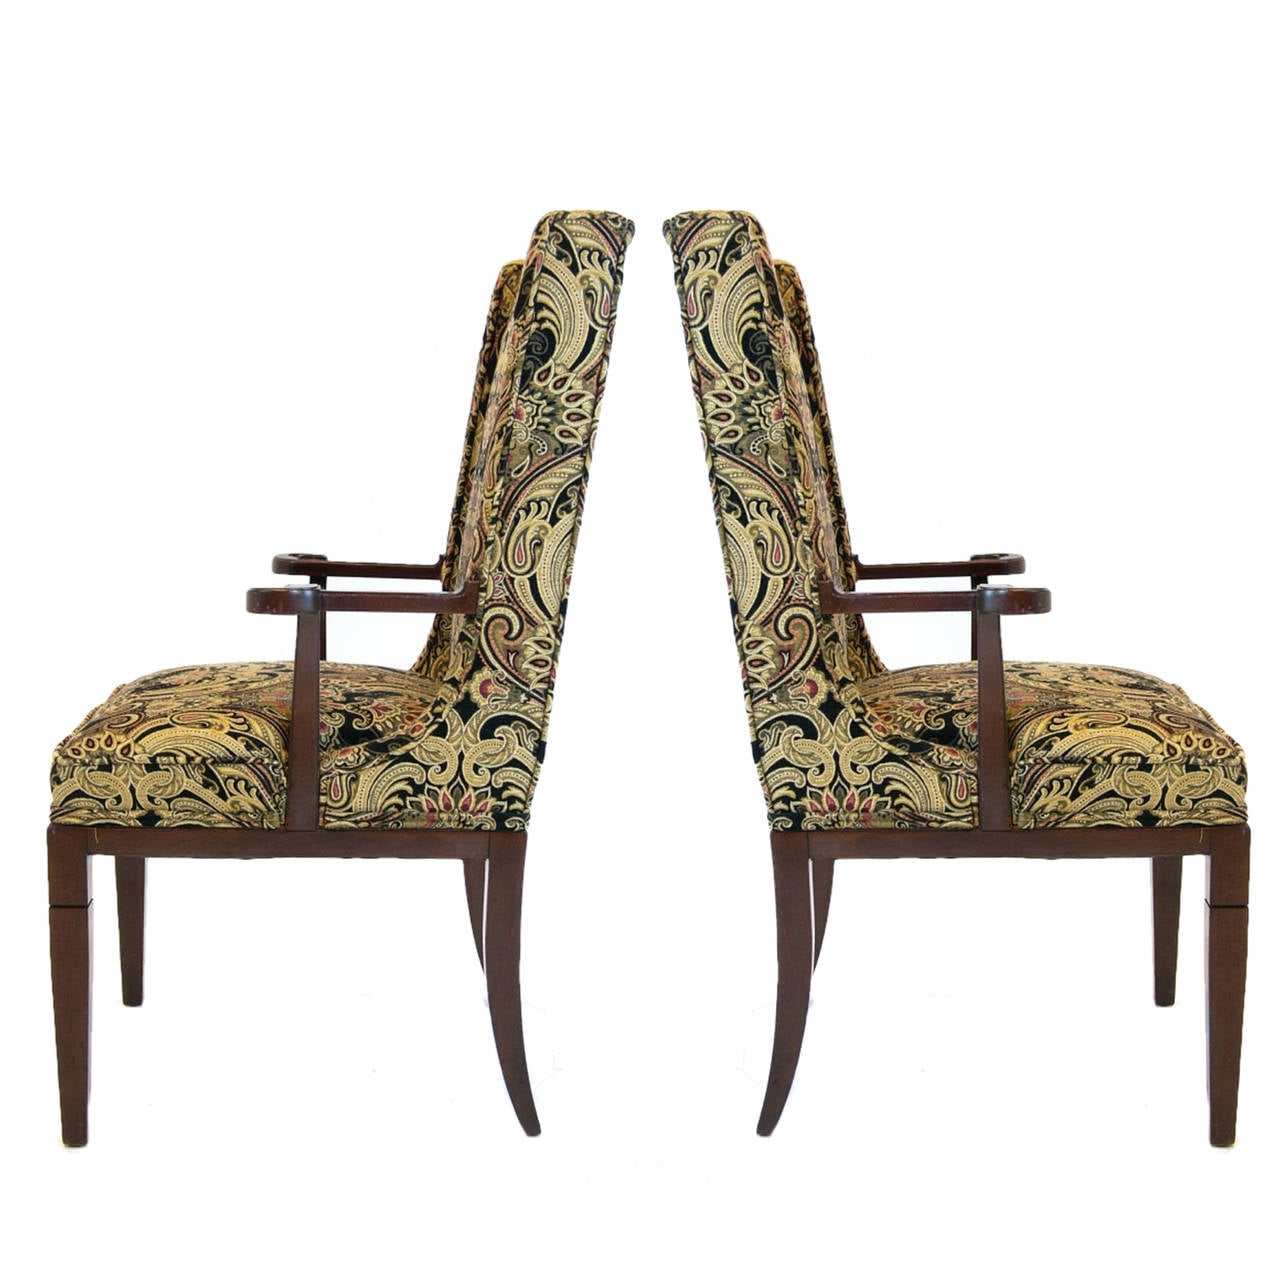 American Pair of Tommi Parzinger Chairs with Tapestry Upholstery for Charak